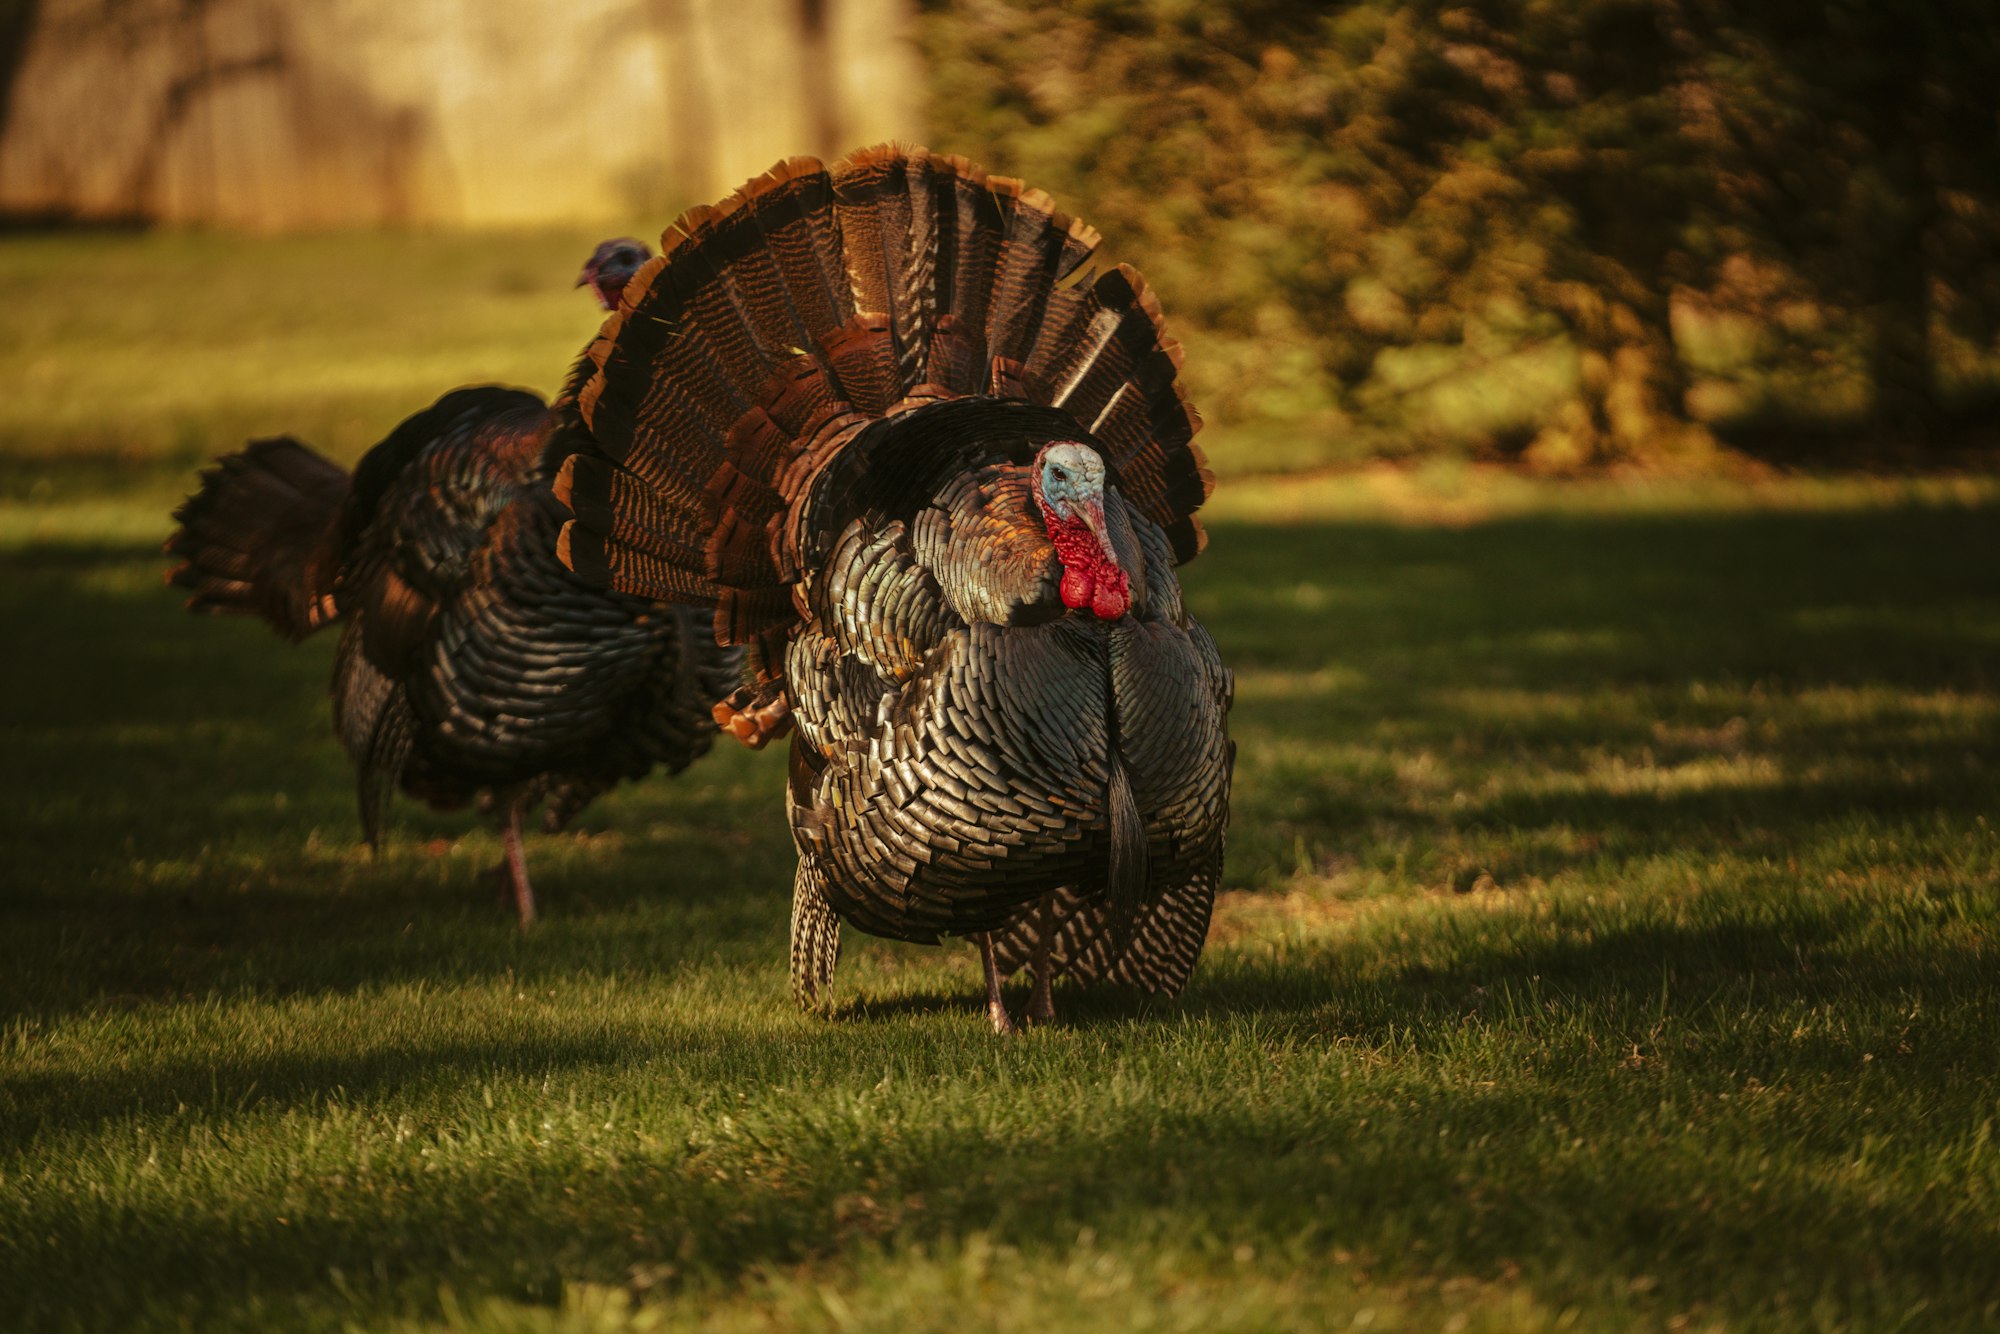 How are turkeys affecting the U.S. economy?